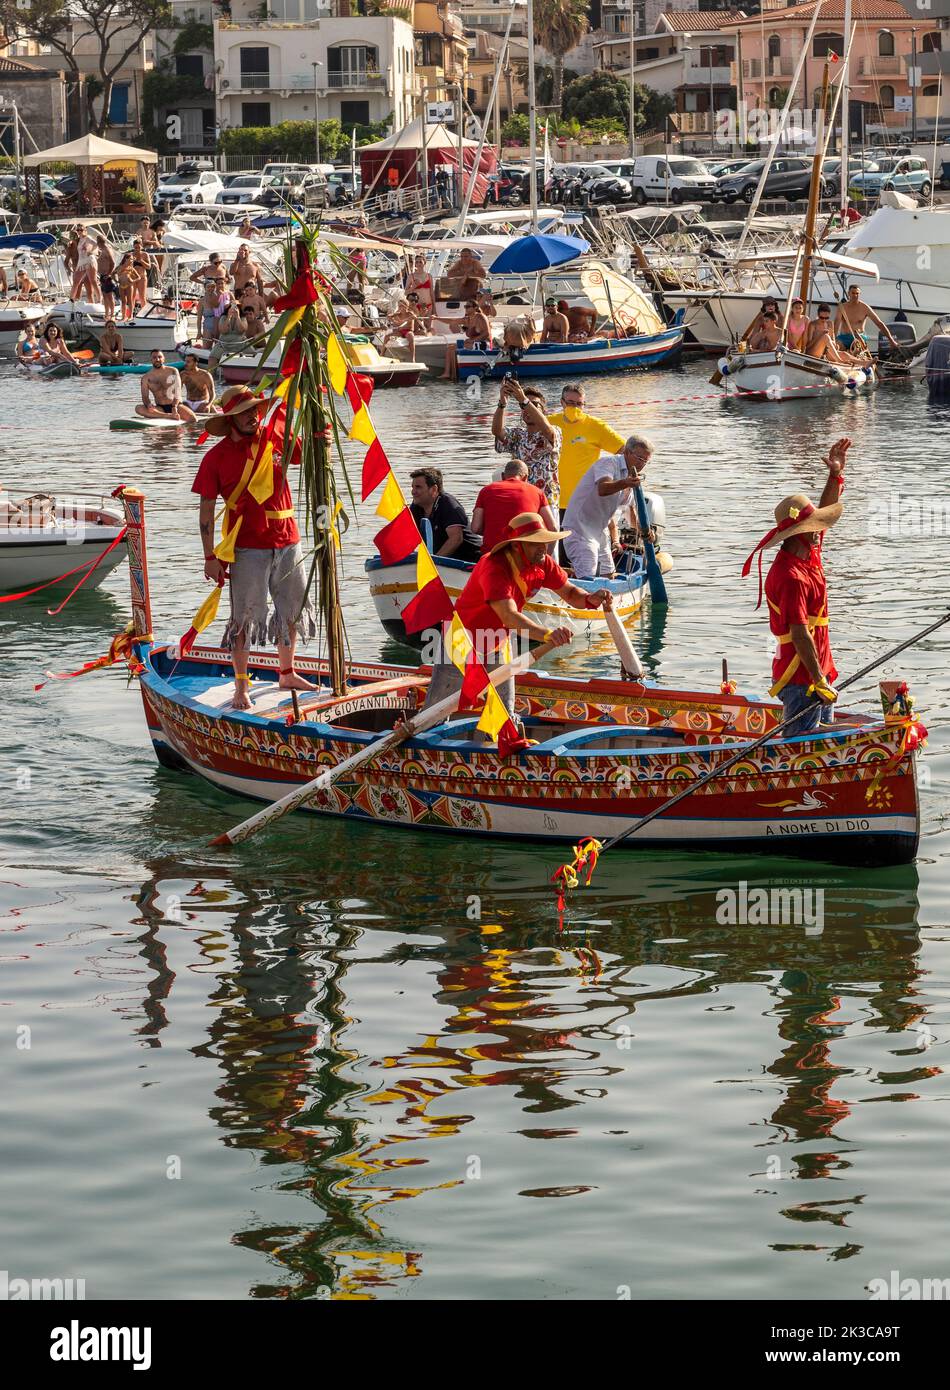 The annual festival of 'U Pisci a Mari' in the Sicilian village of Aci Trezza, near Catania. This takes place around the Feast of the Nativity of St John the Baptist, at the end of June. It represents a traditional fishing expedition for swordfish, which used to take place in the Strait of Messina. The part of the swordfish is played by a swimmer, who is repeatedly caught by the fishermen, bloodily sliced up but then somehow manages to escape. Eventually the 'swordfish' manages to overturn the boat. Stock Photo